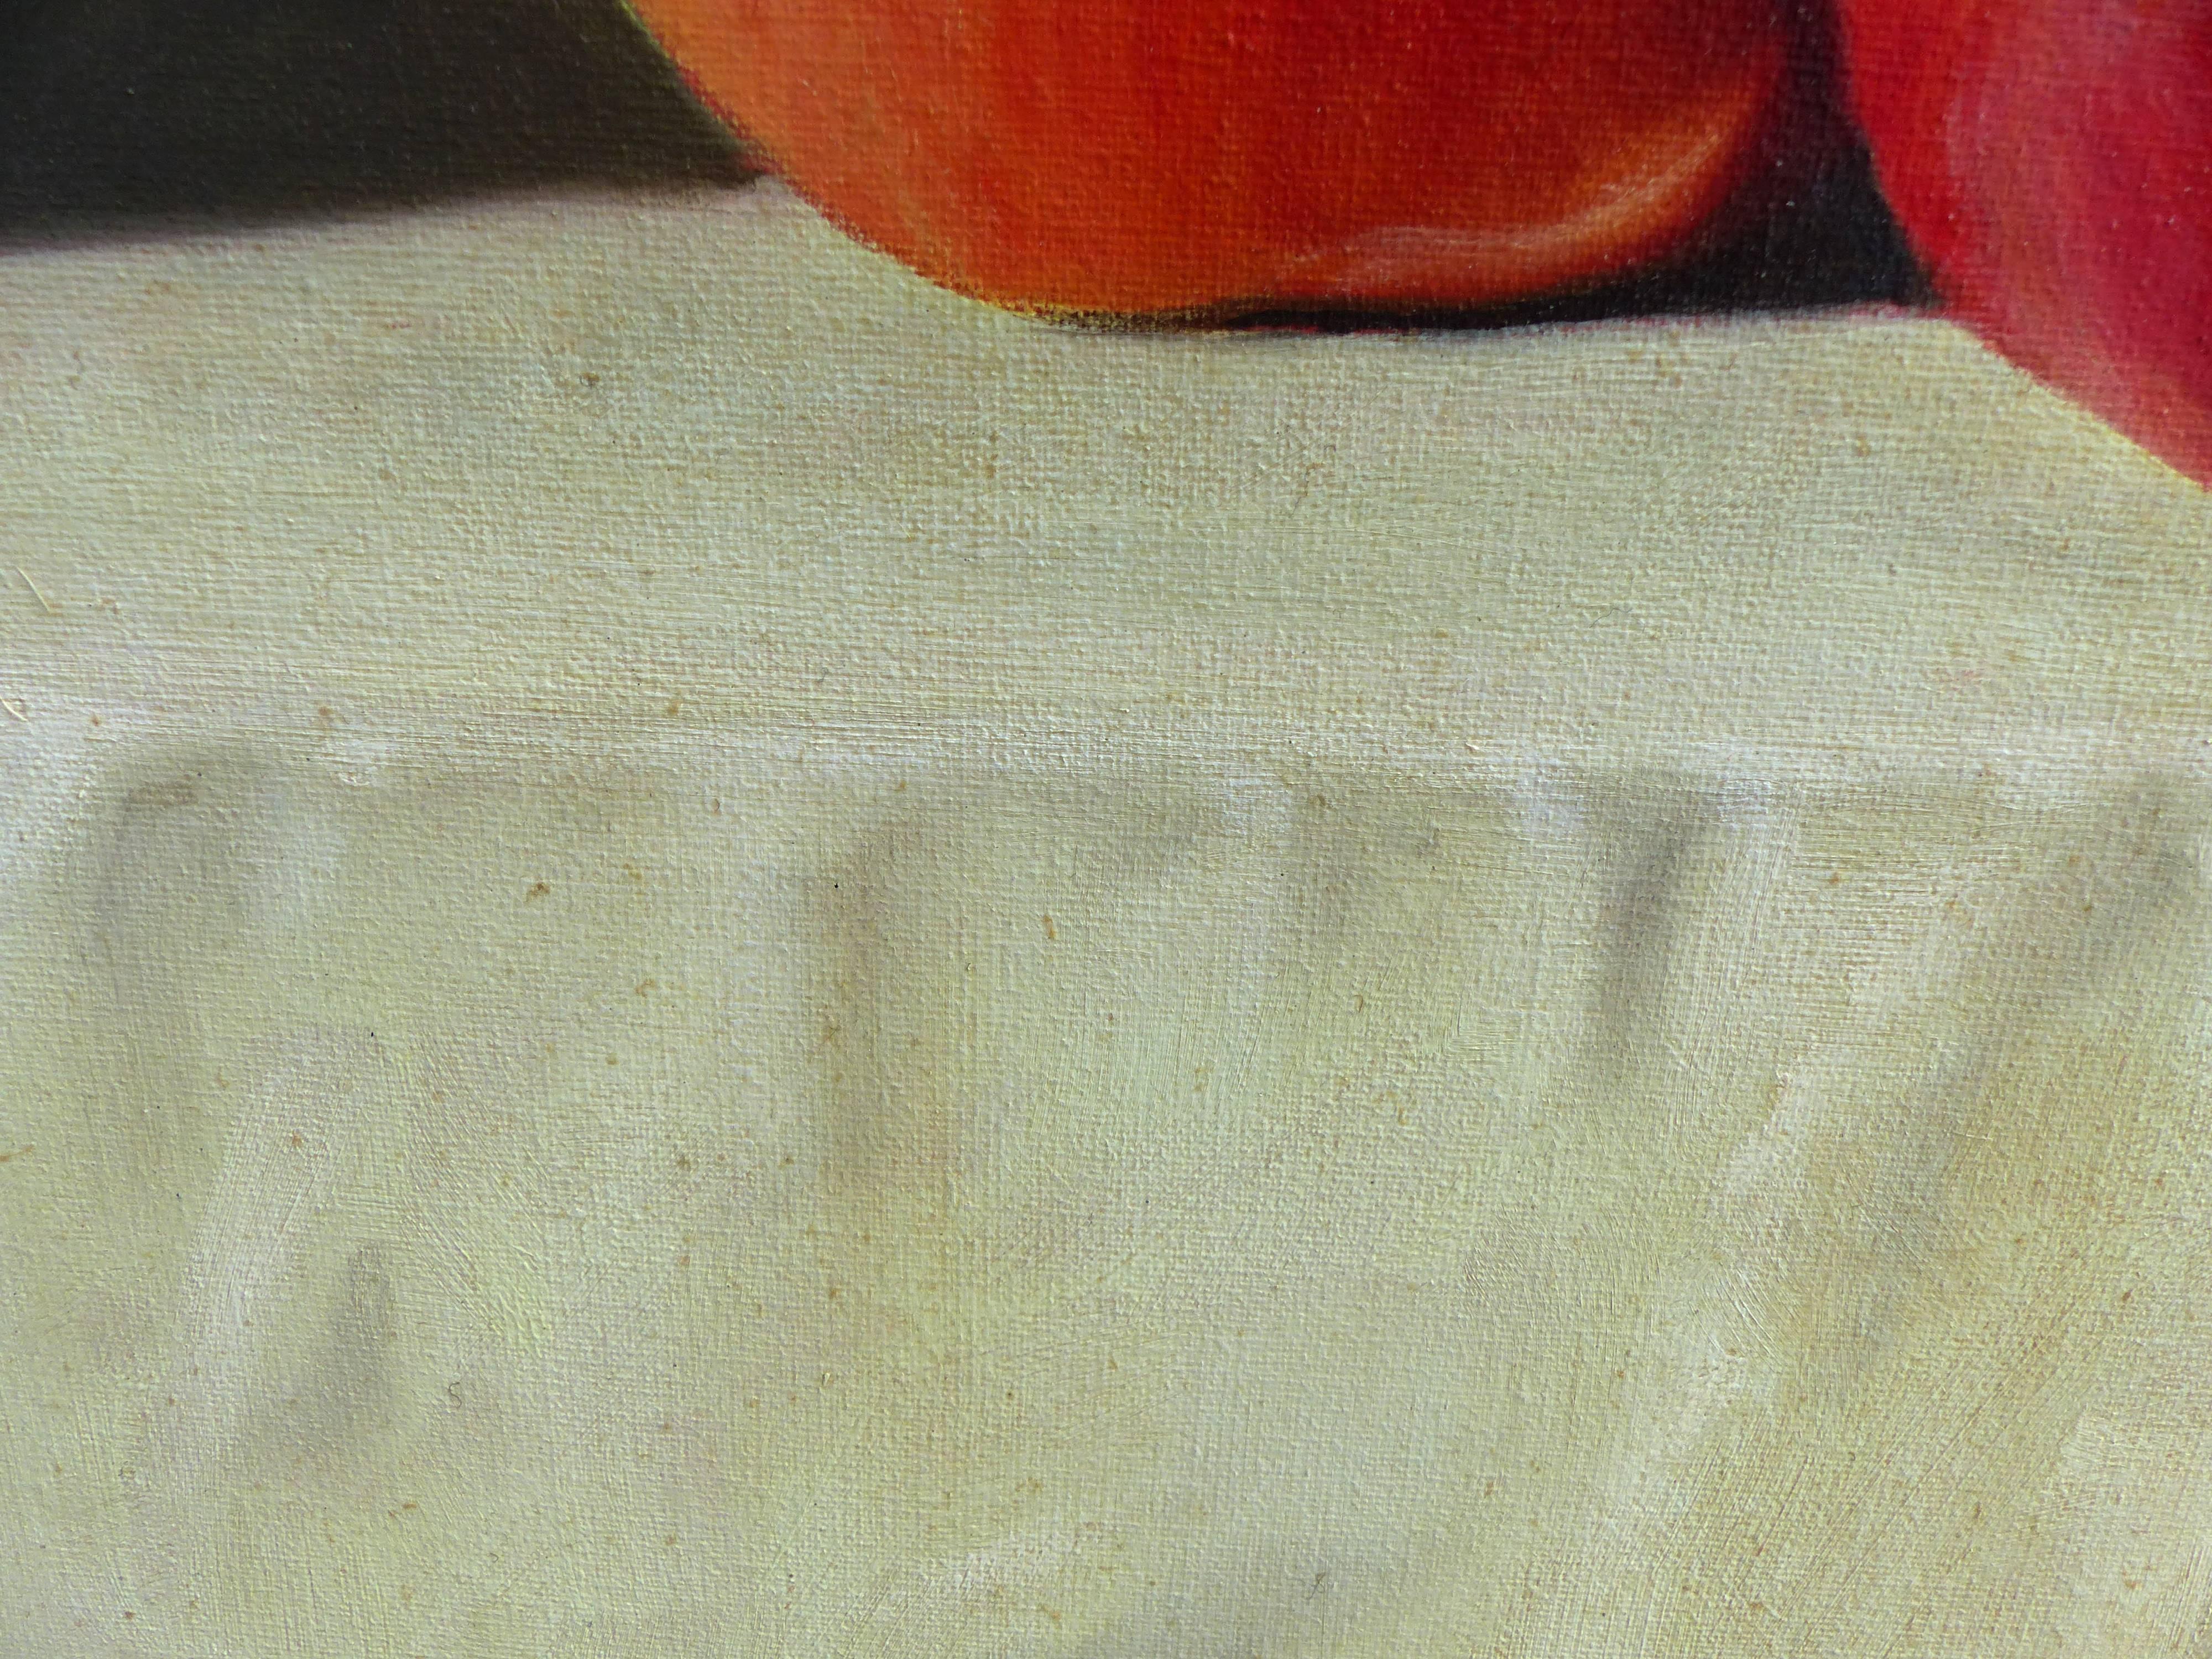 Contemporary Realism Still Life Oil on Canvas with Apples by G. B. Valverde 2